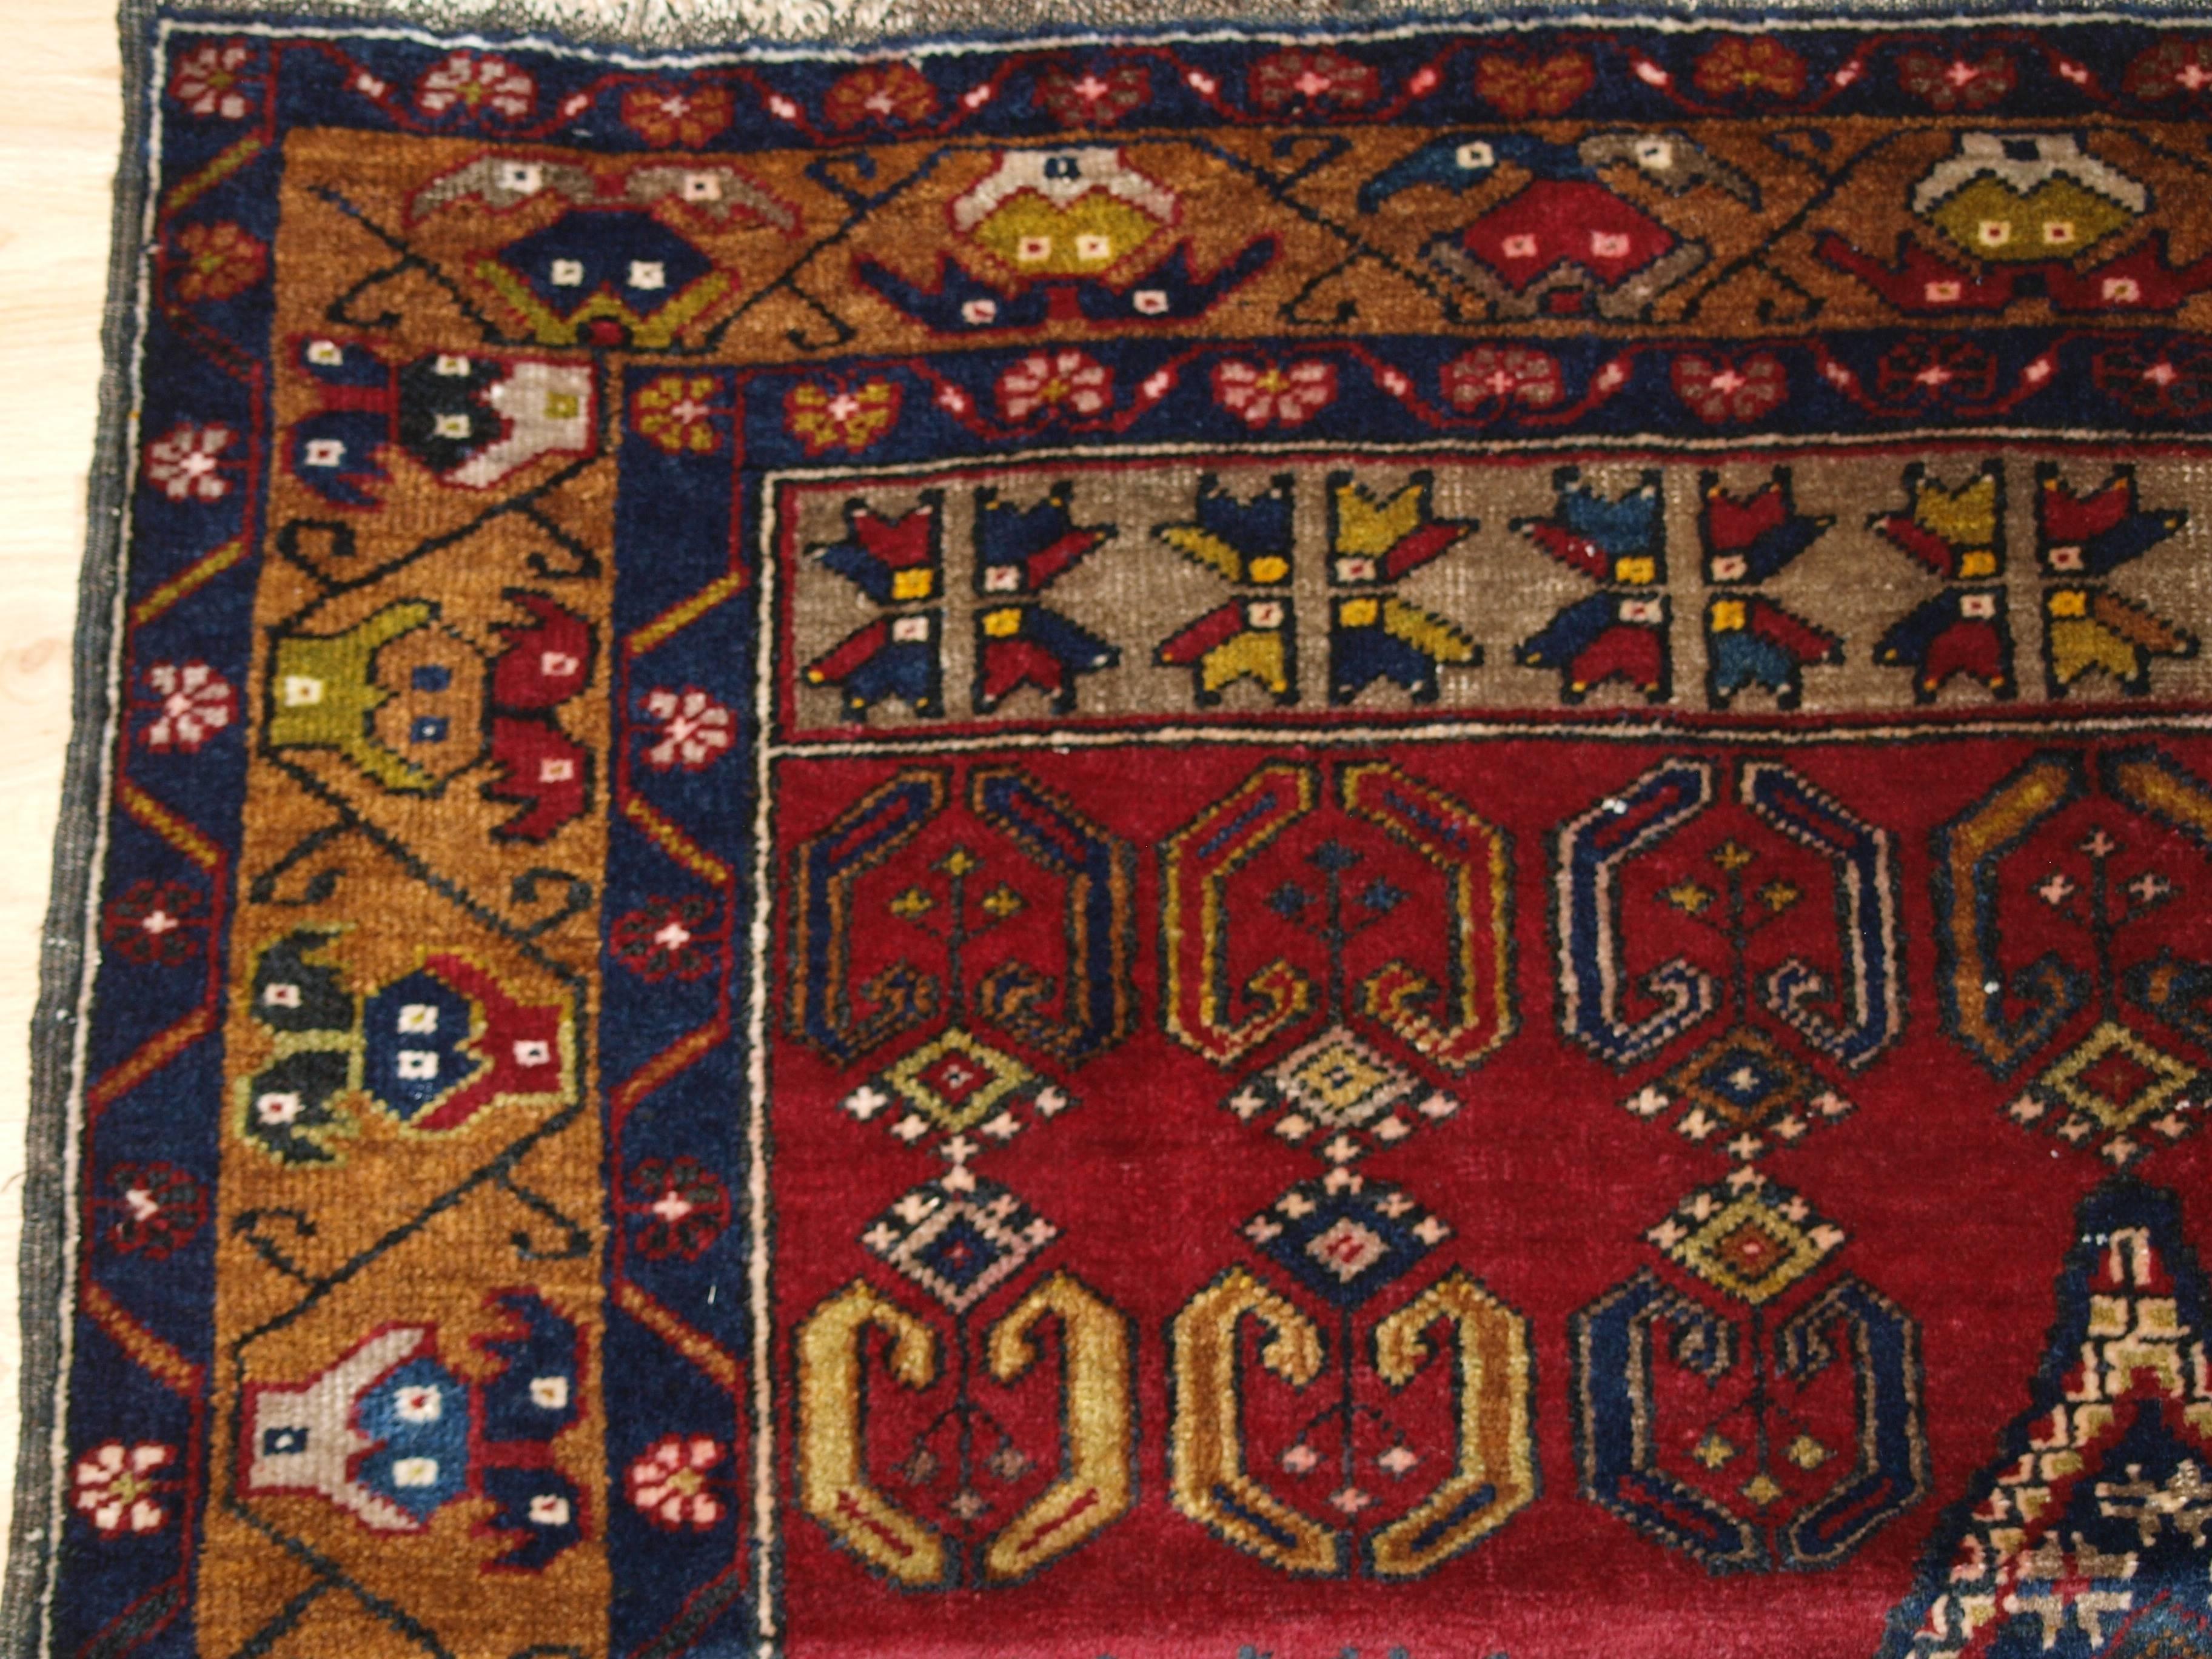 Old Turkish Anatolian Yahyali rug, classic design and great colour, circa 1920.
Size: 6ft 5in x 3ft 7in (184 x 117cm).

Antique Anatolian Yahyali rug with traditional large medallion design.

circa 1920.

A very good example of this Classic